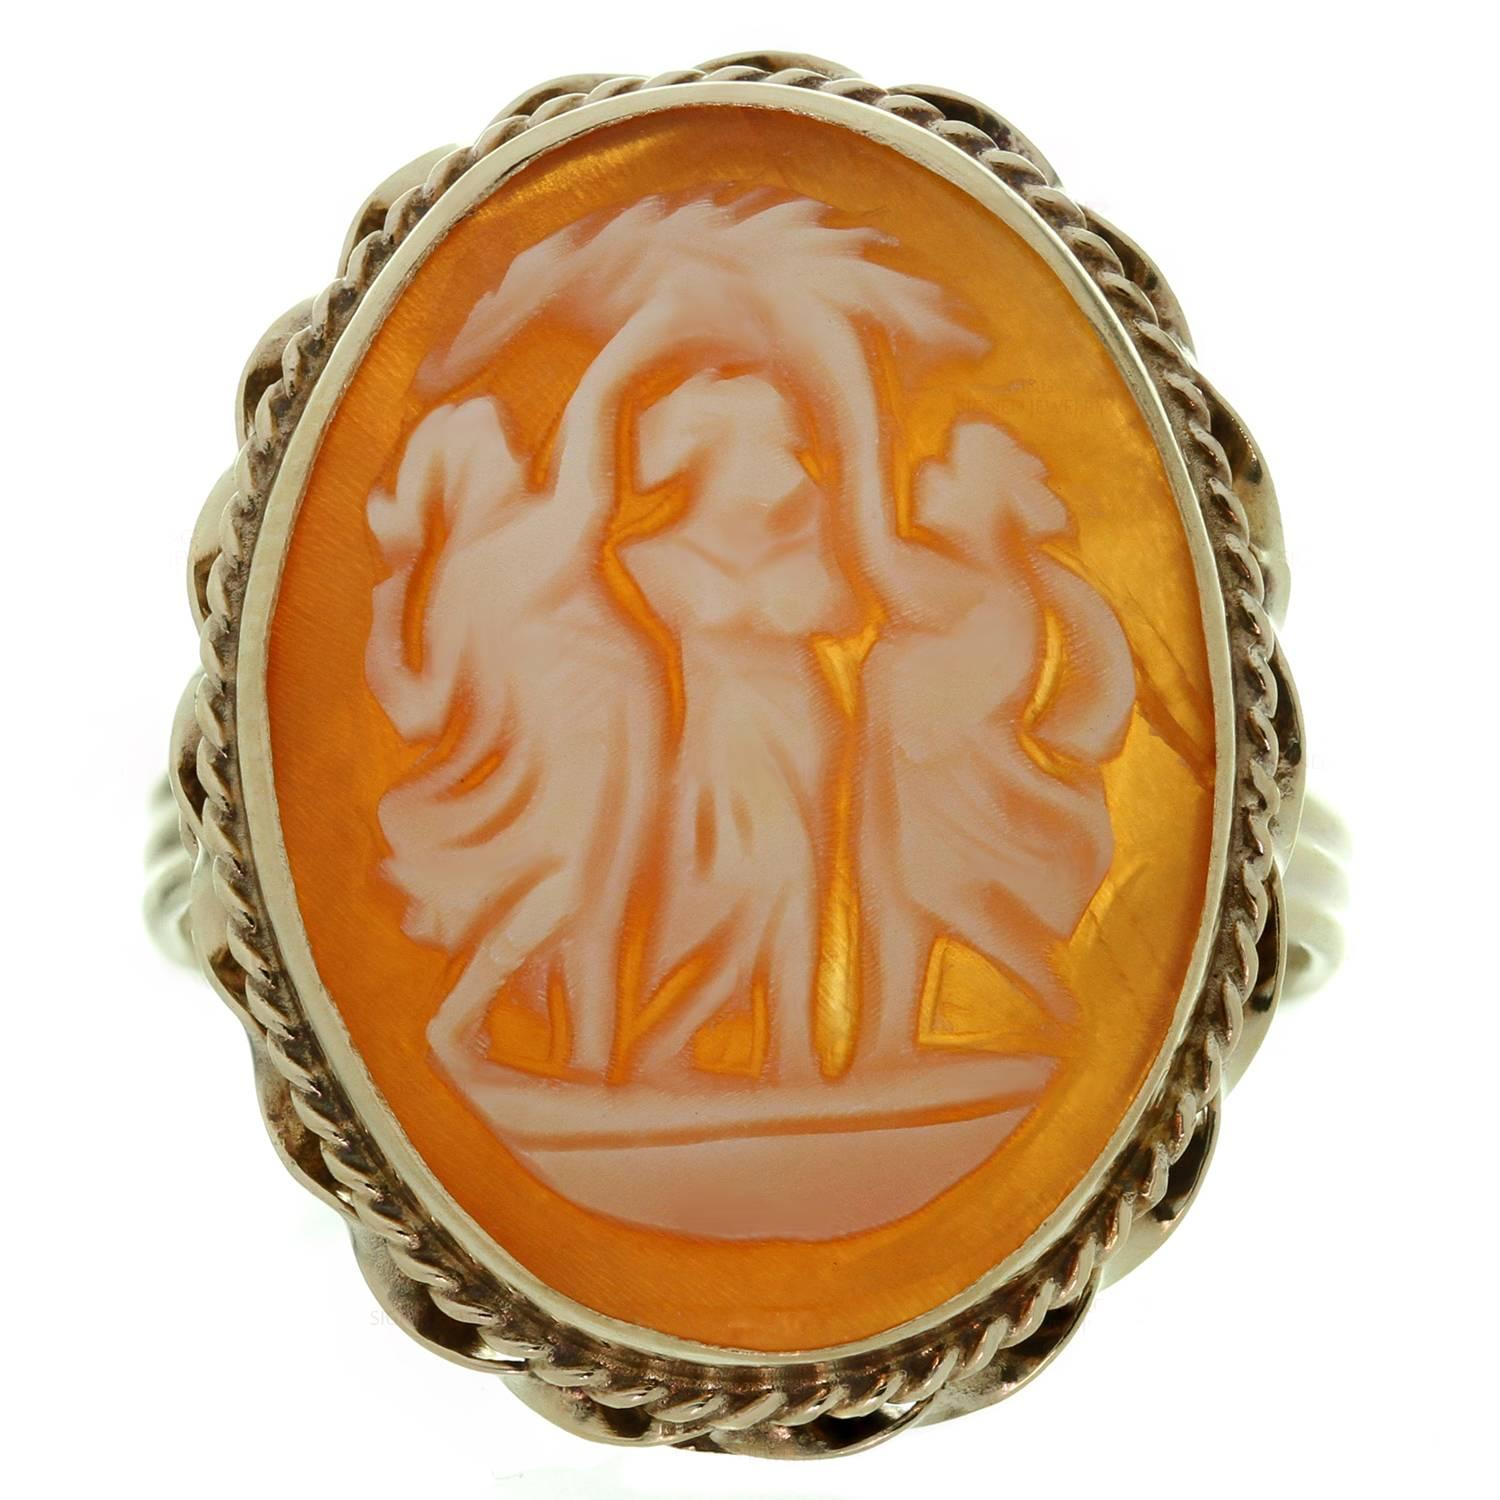 This elegant vintage ring is crafted in 14k yellow gold and features a beautiful shell cameo with a trio of female figures representing the three graces. Made in United States circa 1970s. Measurements: 0.70